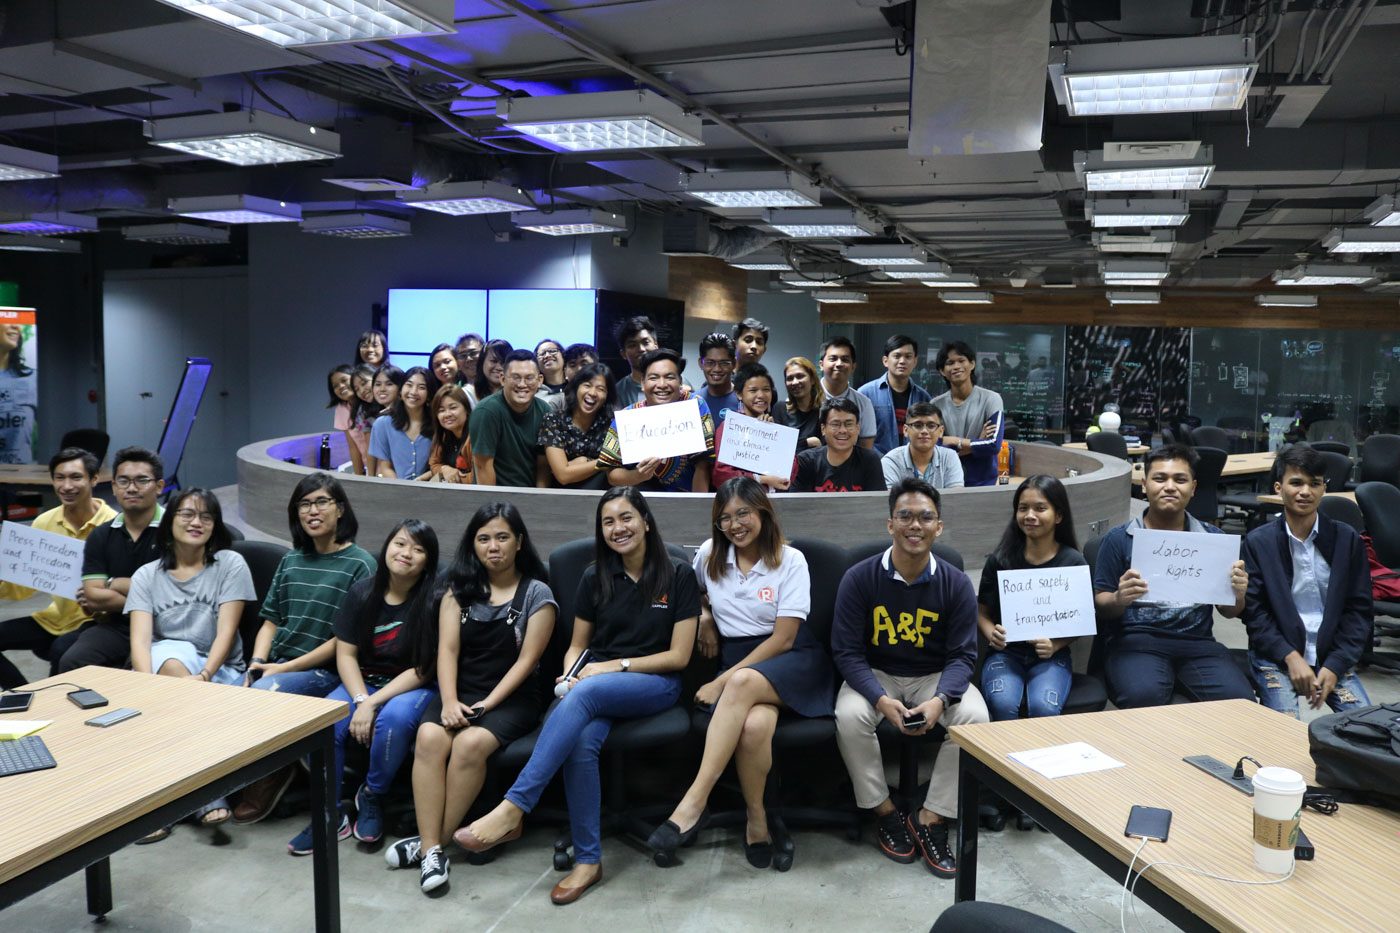 Youth, advocates share ideal Philippines ahead of SONA 2019